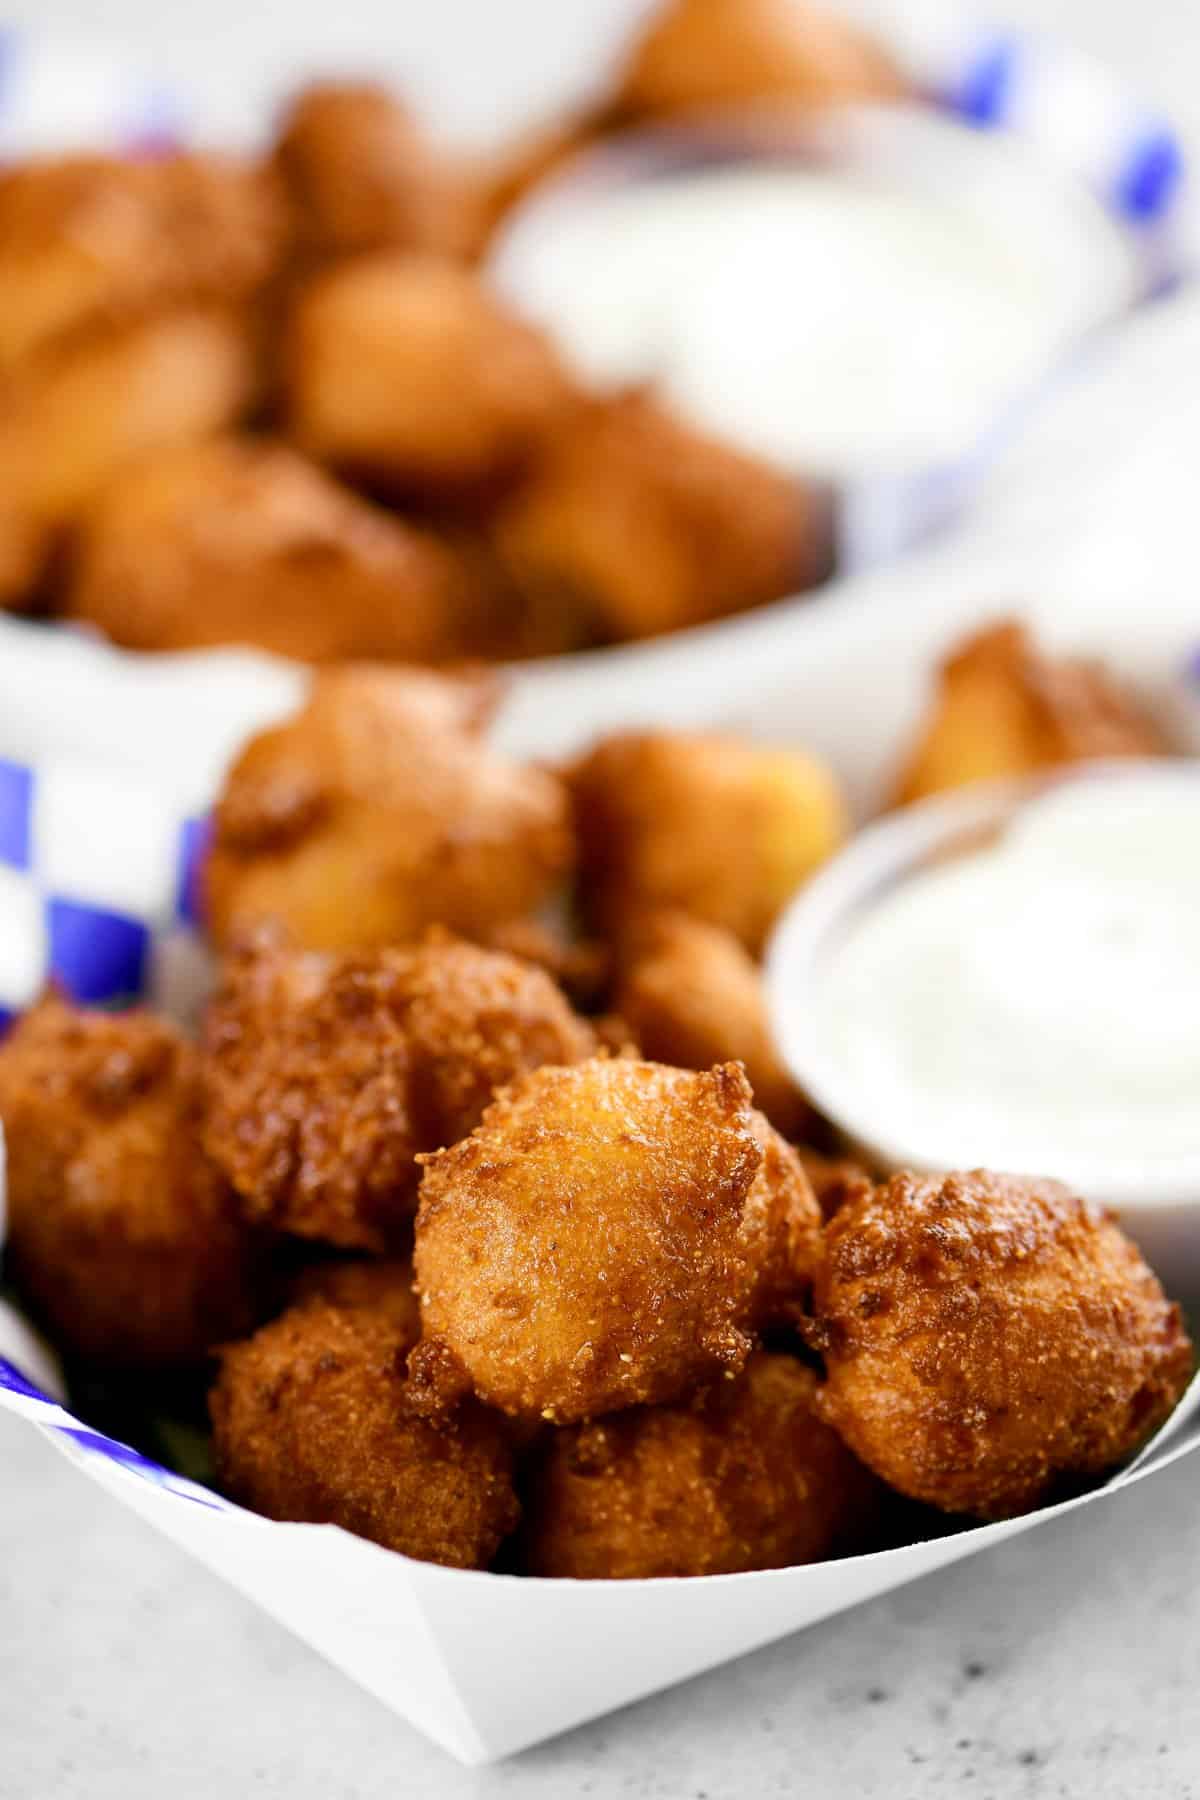 hush puppies and dip in a paper tray